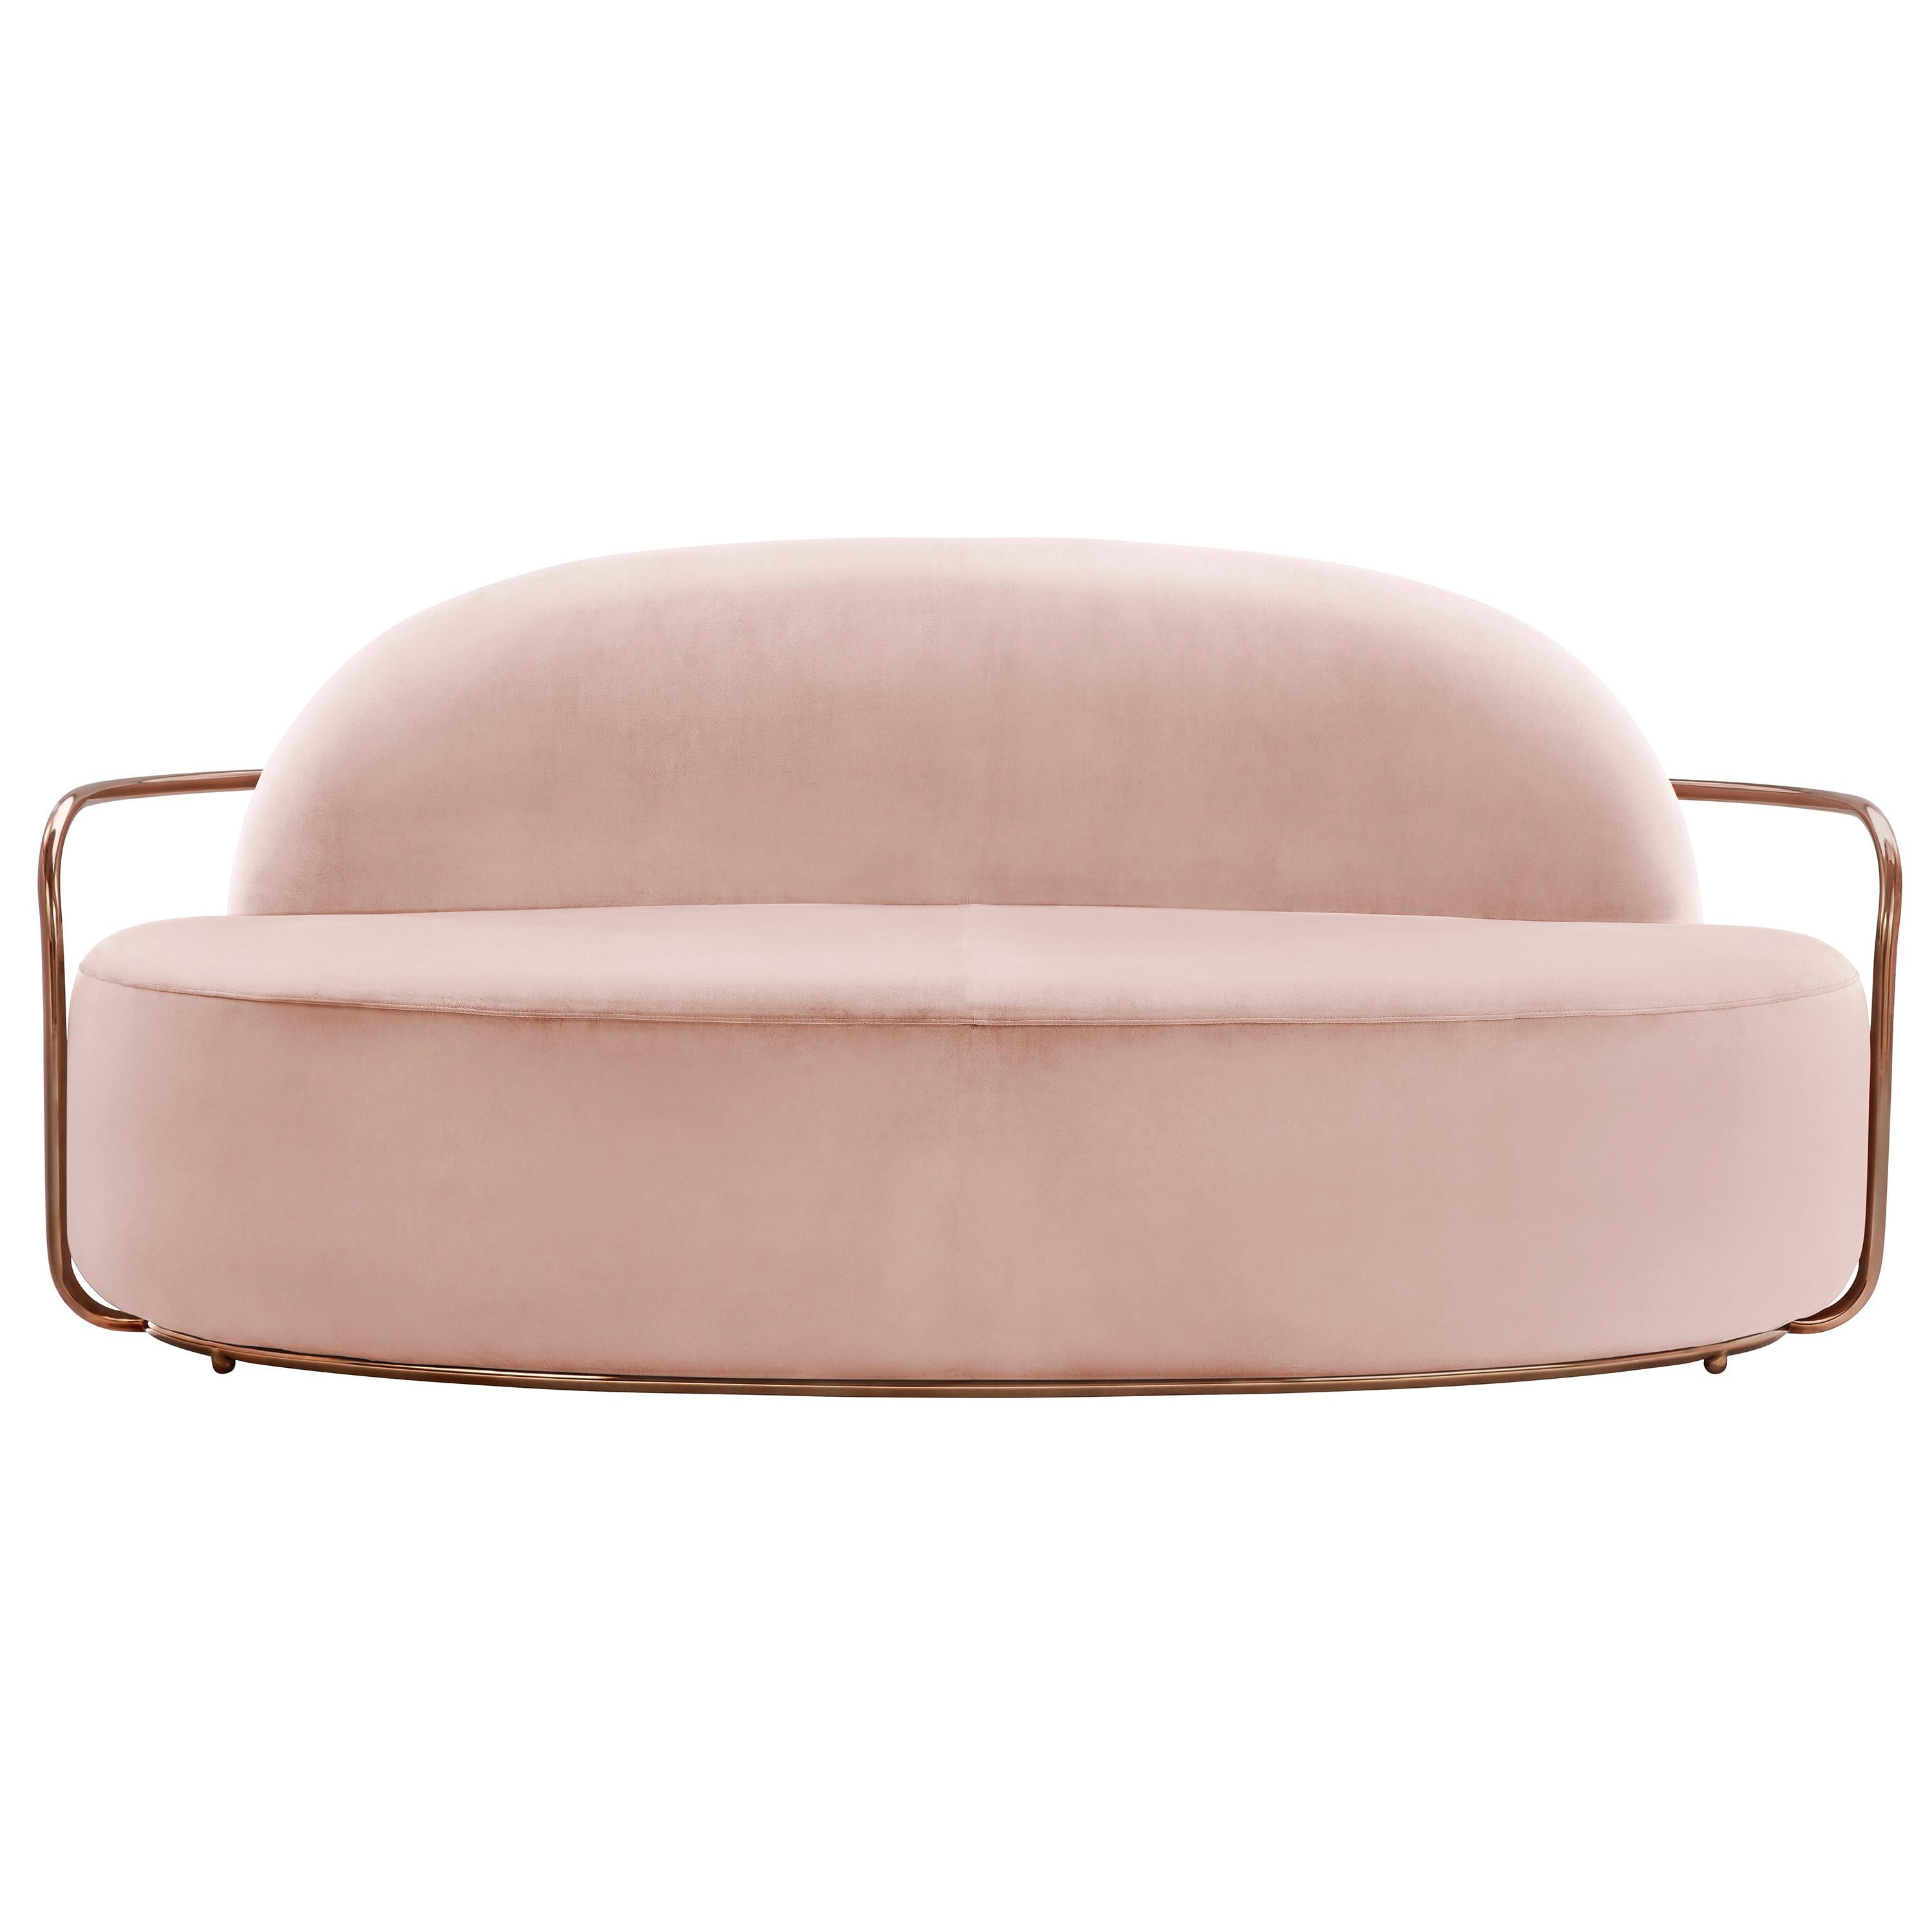 Orion 3 Seat Sofa with Plush Pink Velvet and Rose Gold Arms by Nika Zupanc